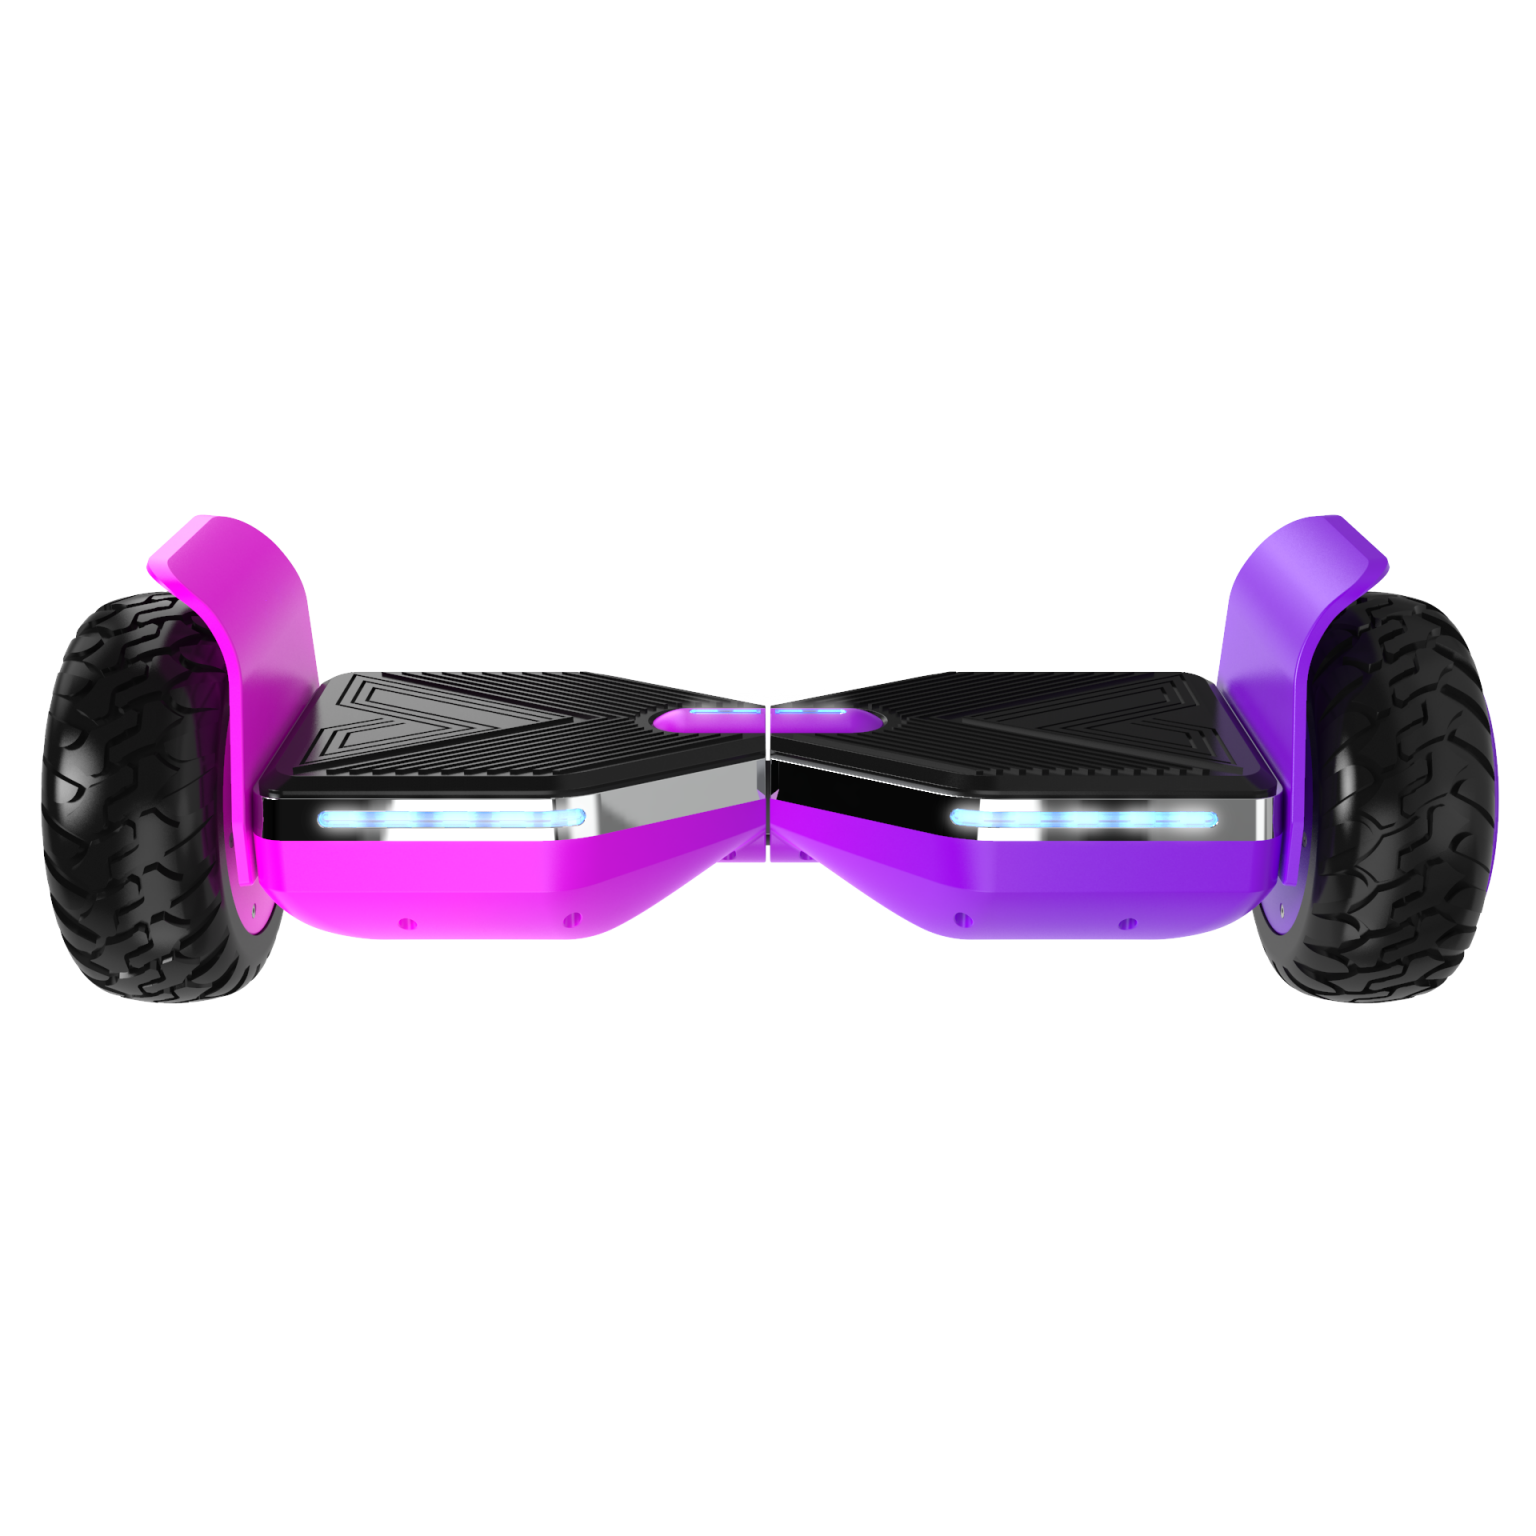 GOTRAX Infinity Pro Bluetooth Hoverboard – UL 2272 Certified Off Road ...